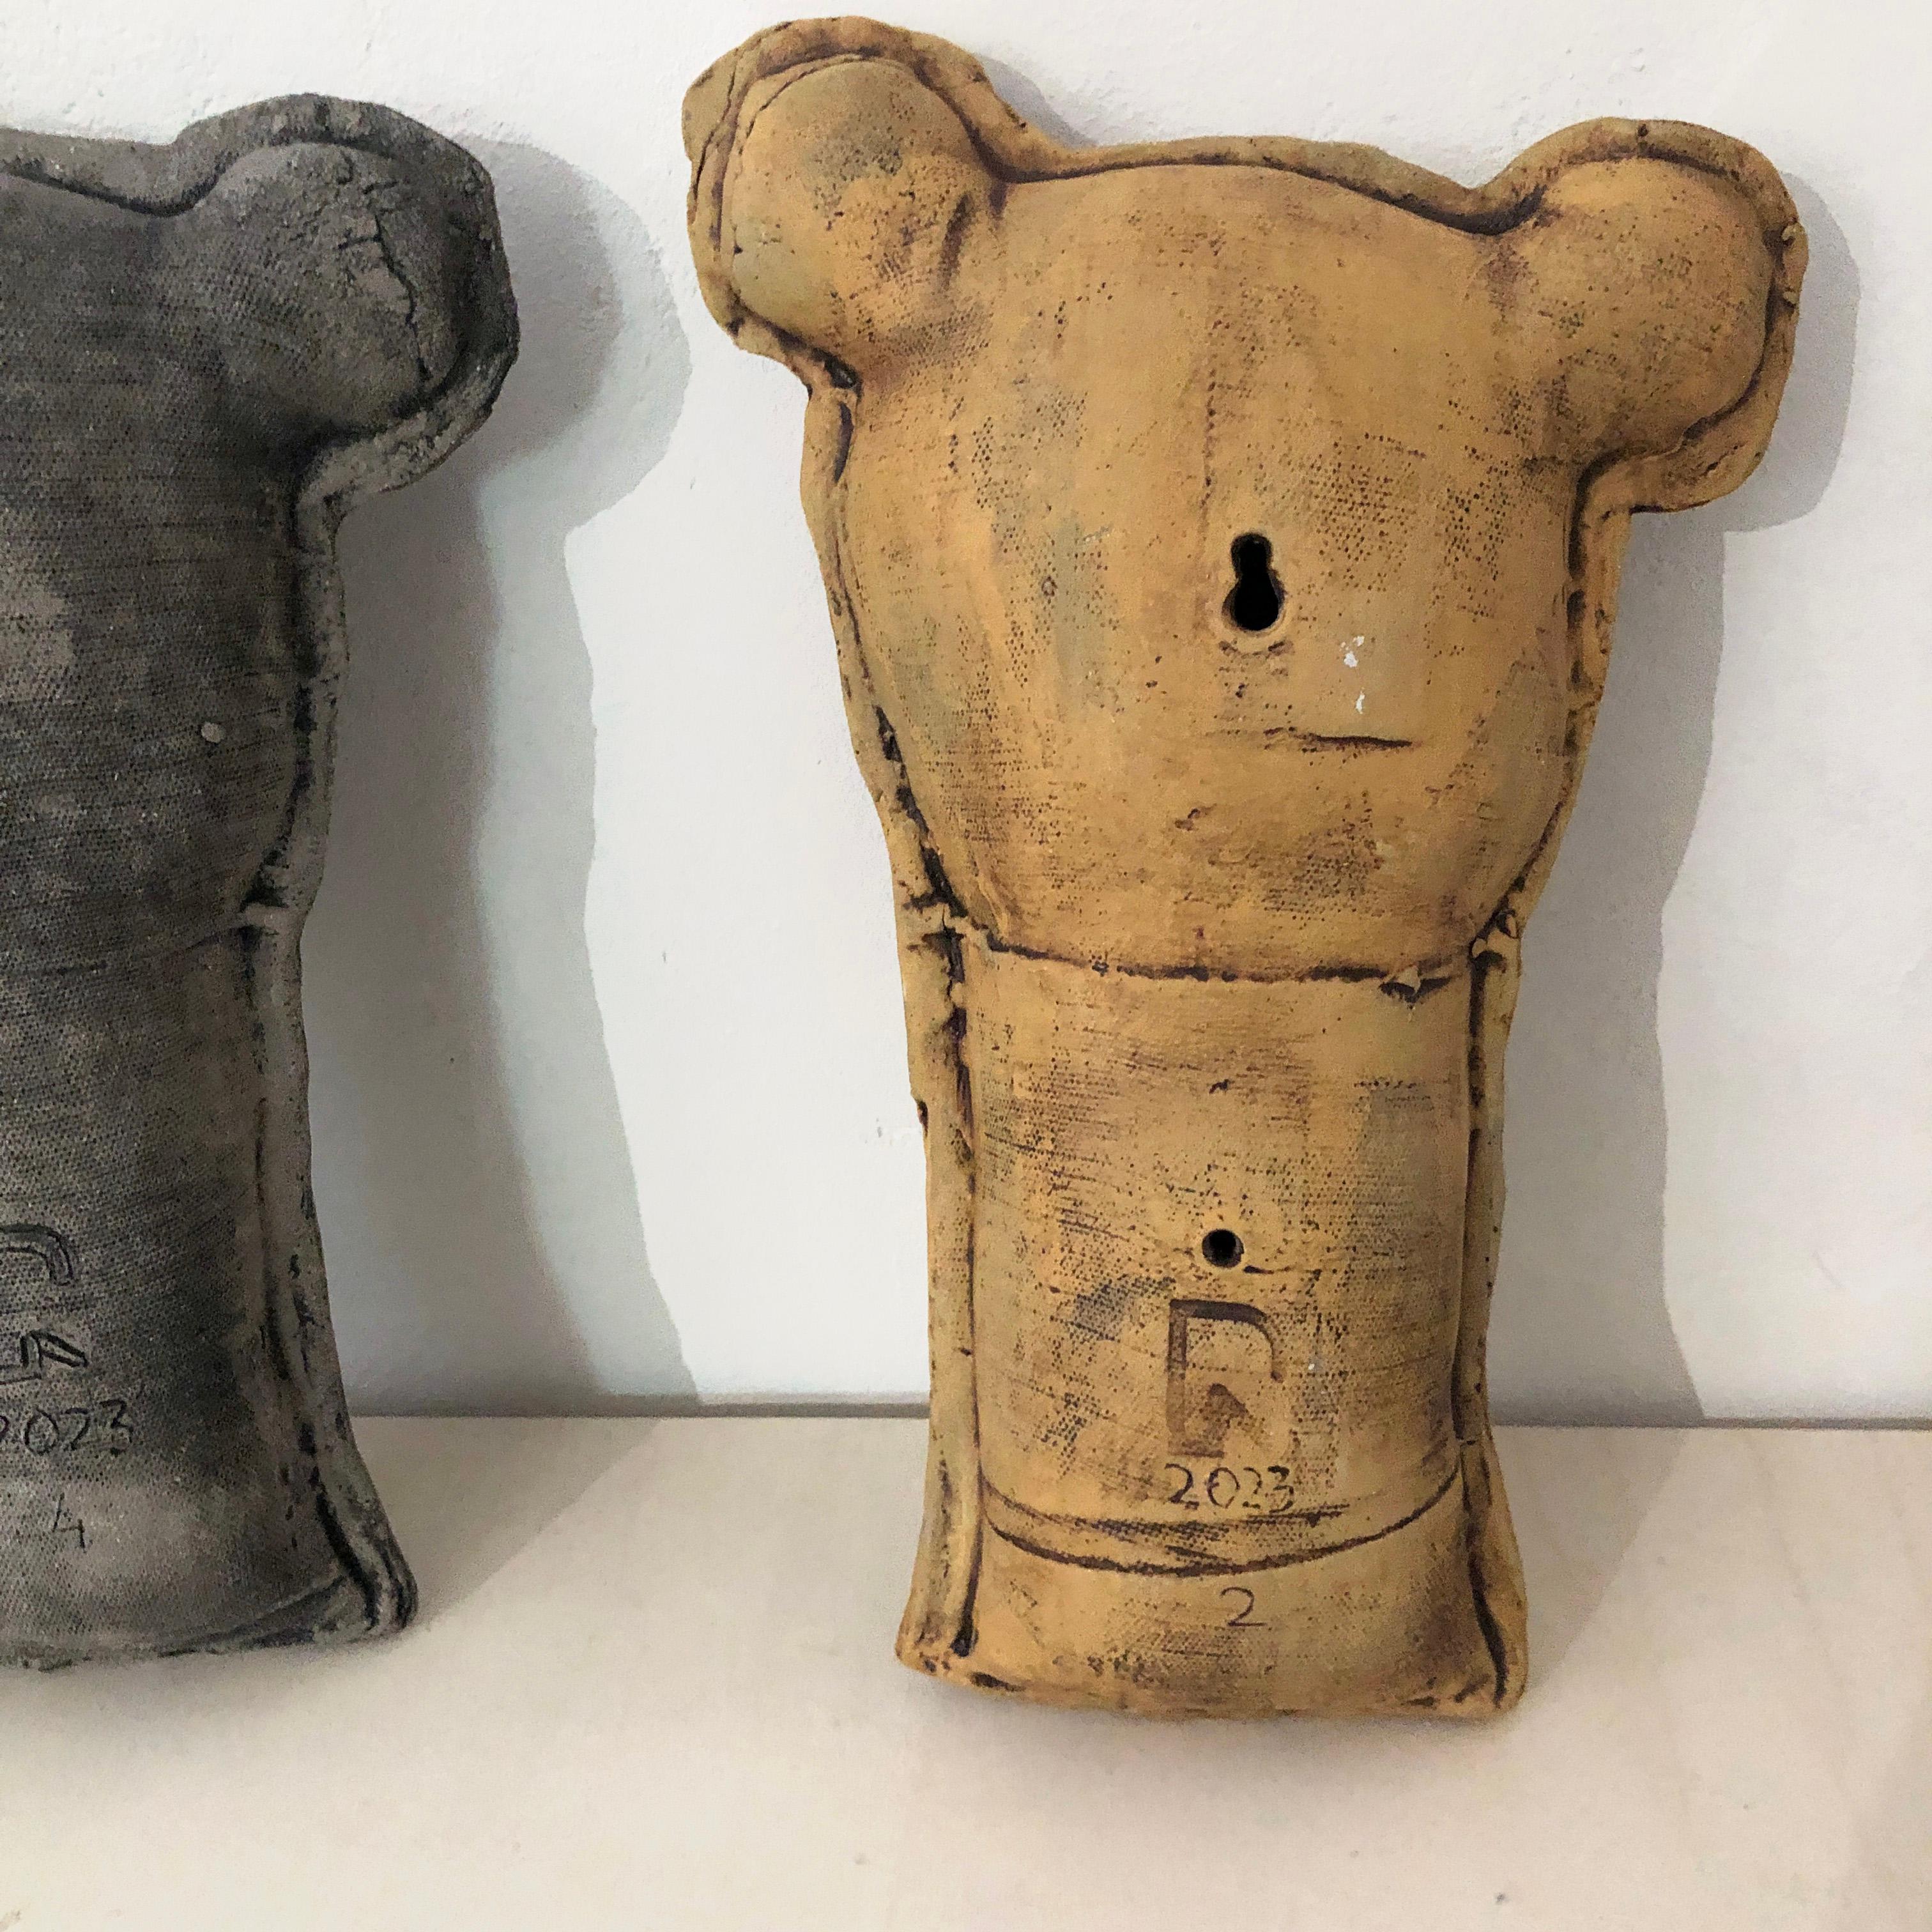 Introducing Théodora Béatrice the first or simply Teddy B, a cute ceramic teddy bear to hang on your wall. 

Combining contemporary aesthetics with a touch of rebellion and  urban charm. Crafted by the skilled hands of Renate Frotscher, this modern